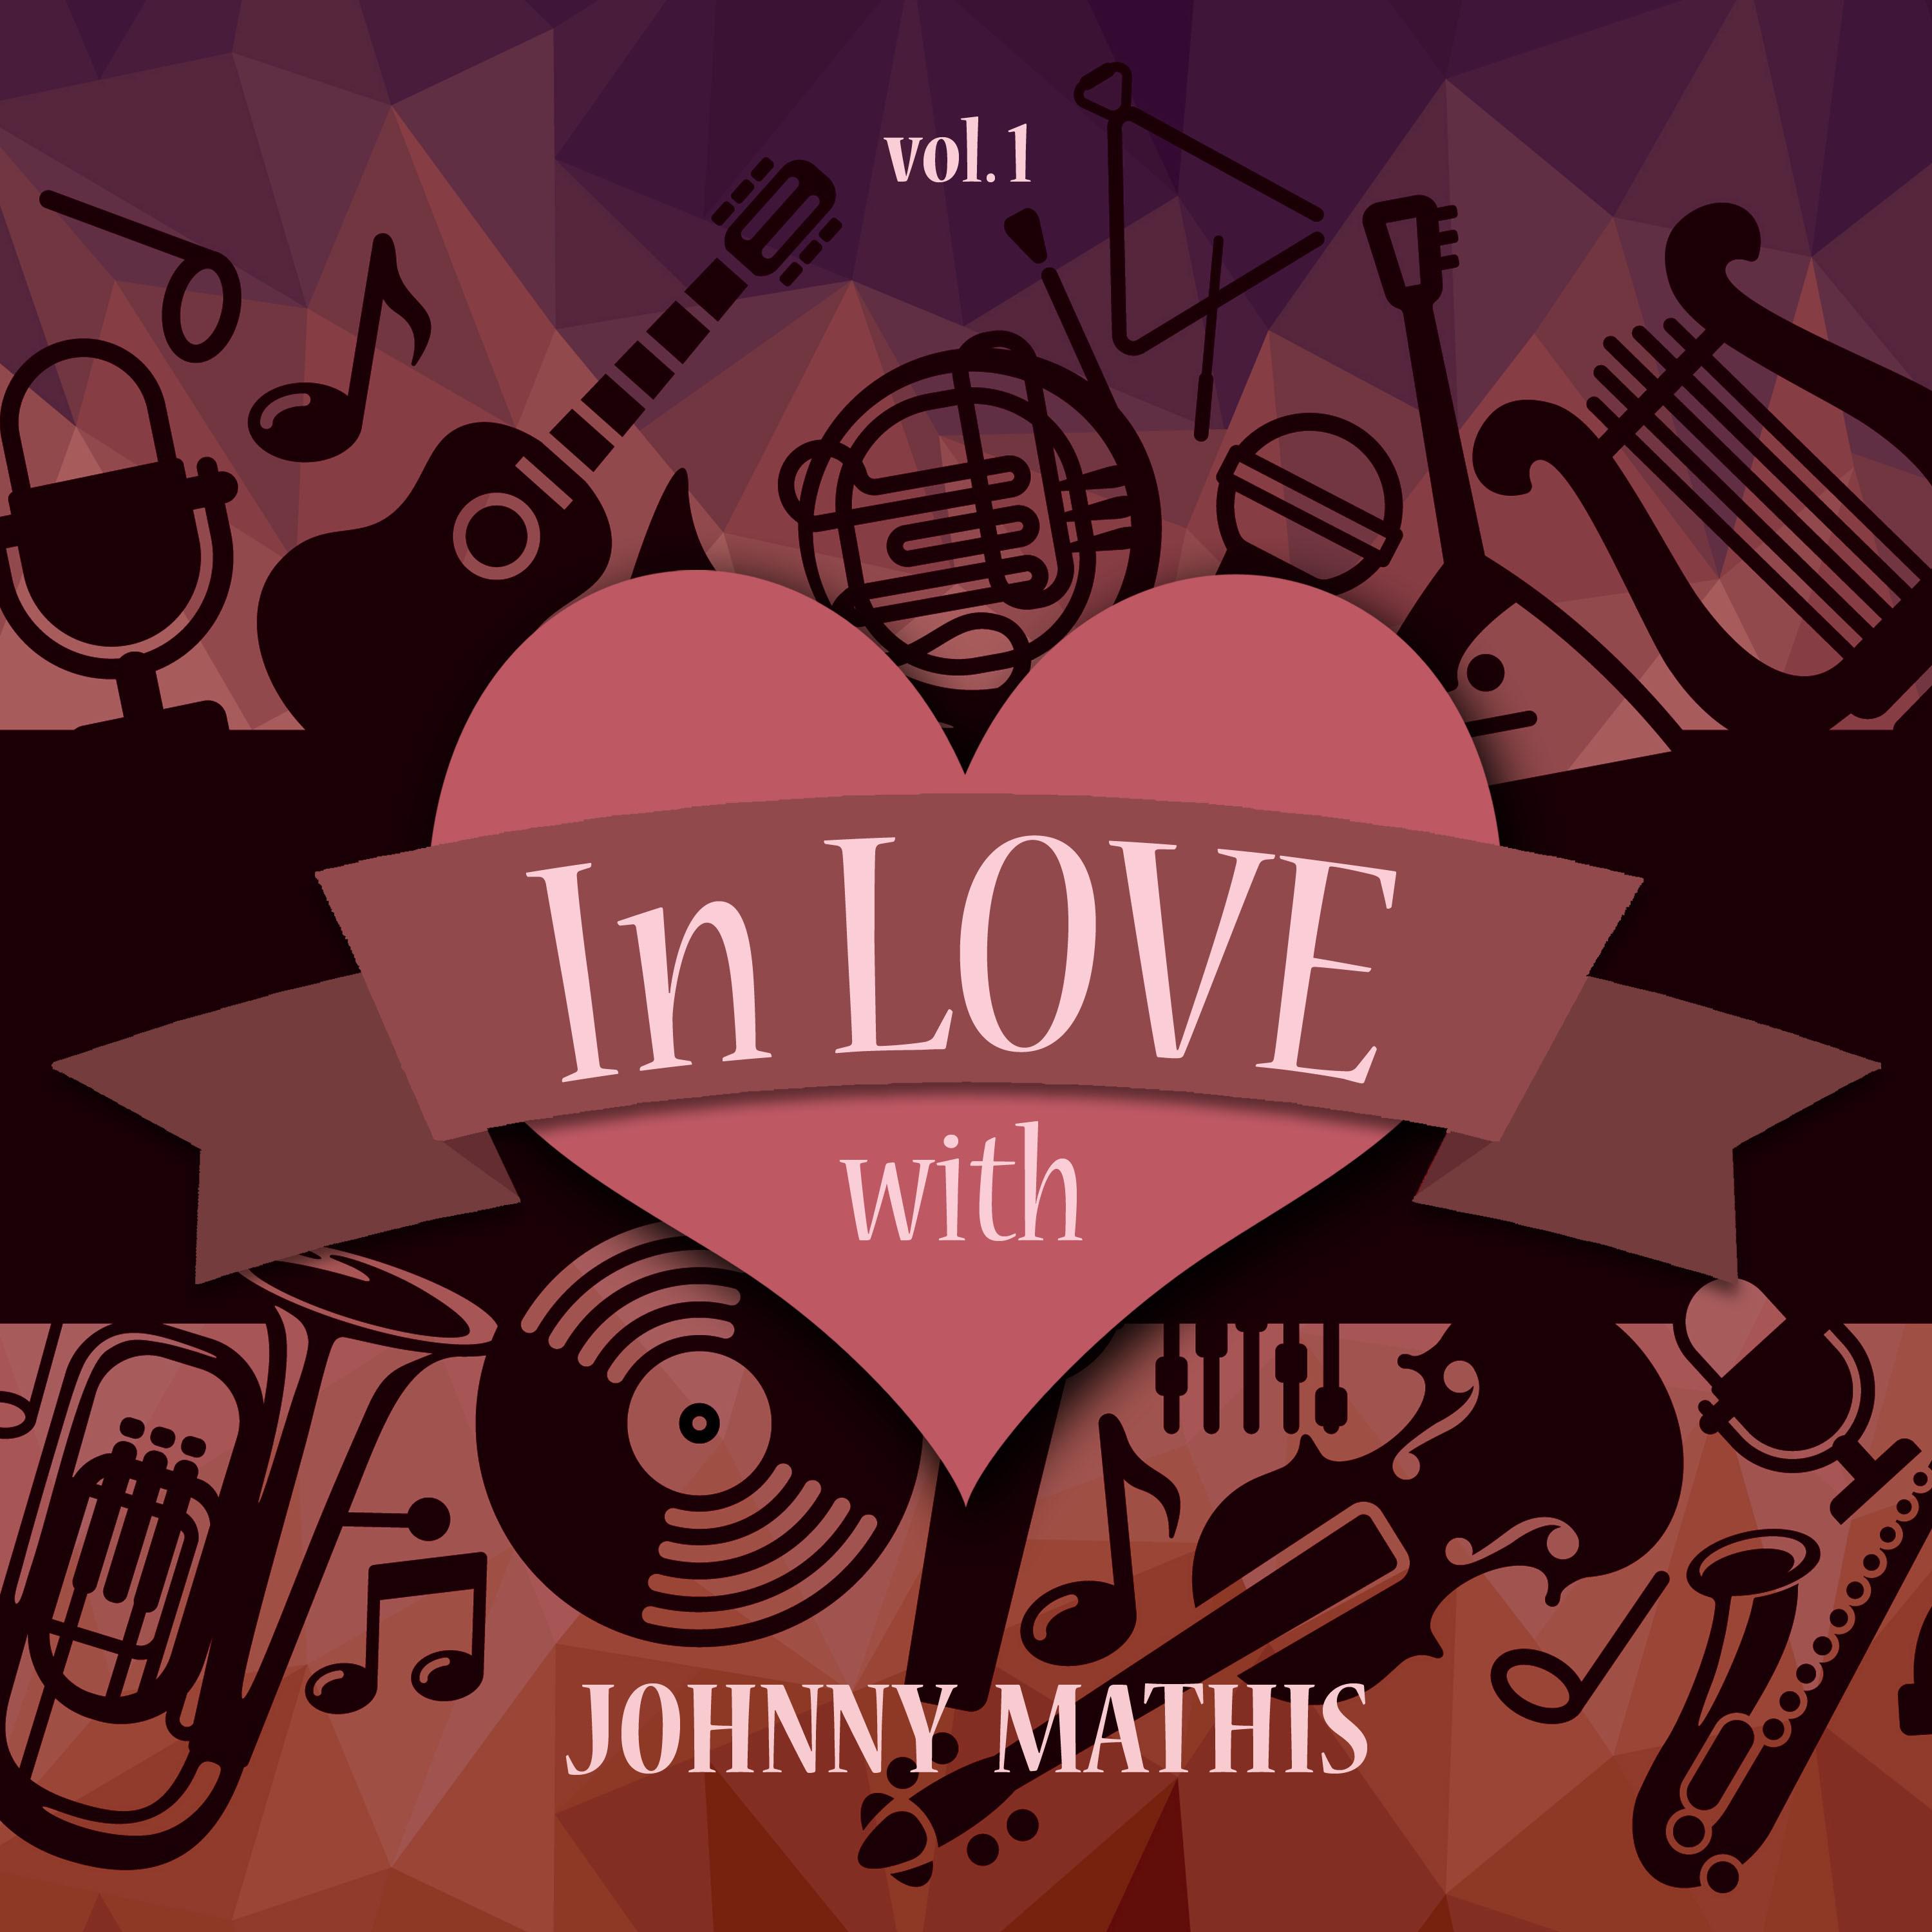 In Love with Johnny Mathis, Vol. 1